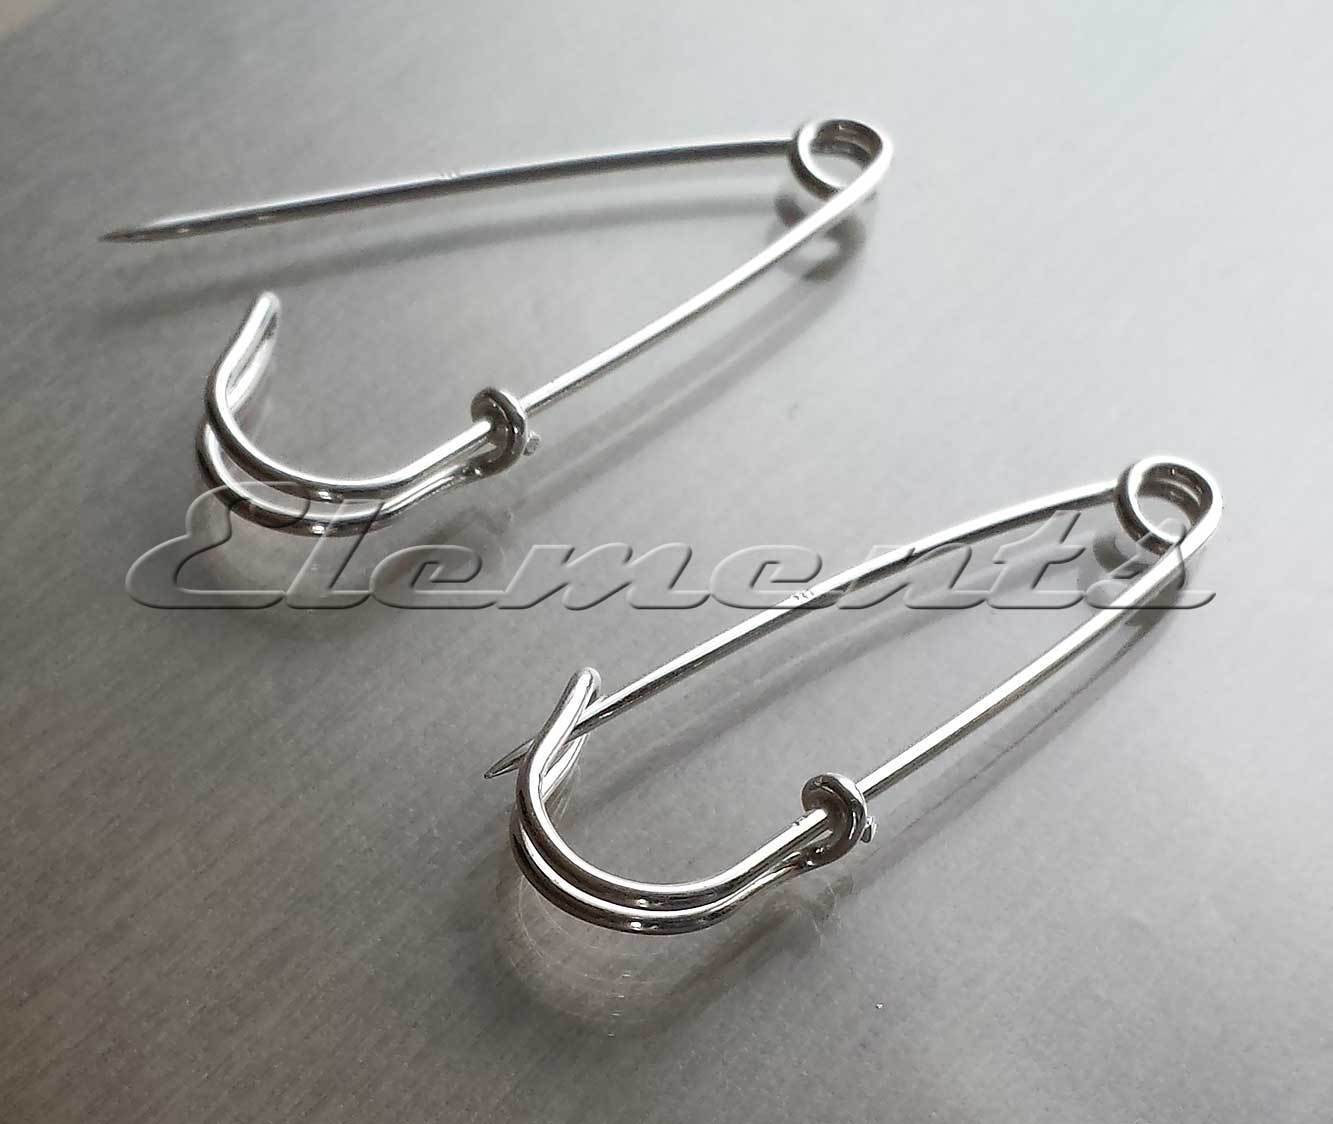 Solid 925 Sterling Silver Kilt Safety Pins 44mm Long SF176